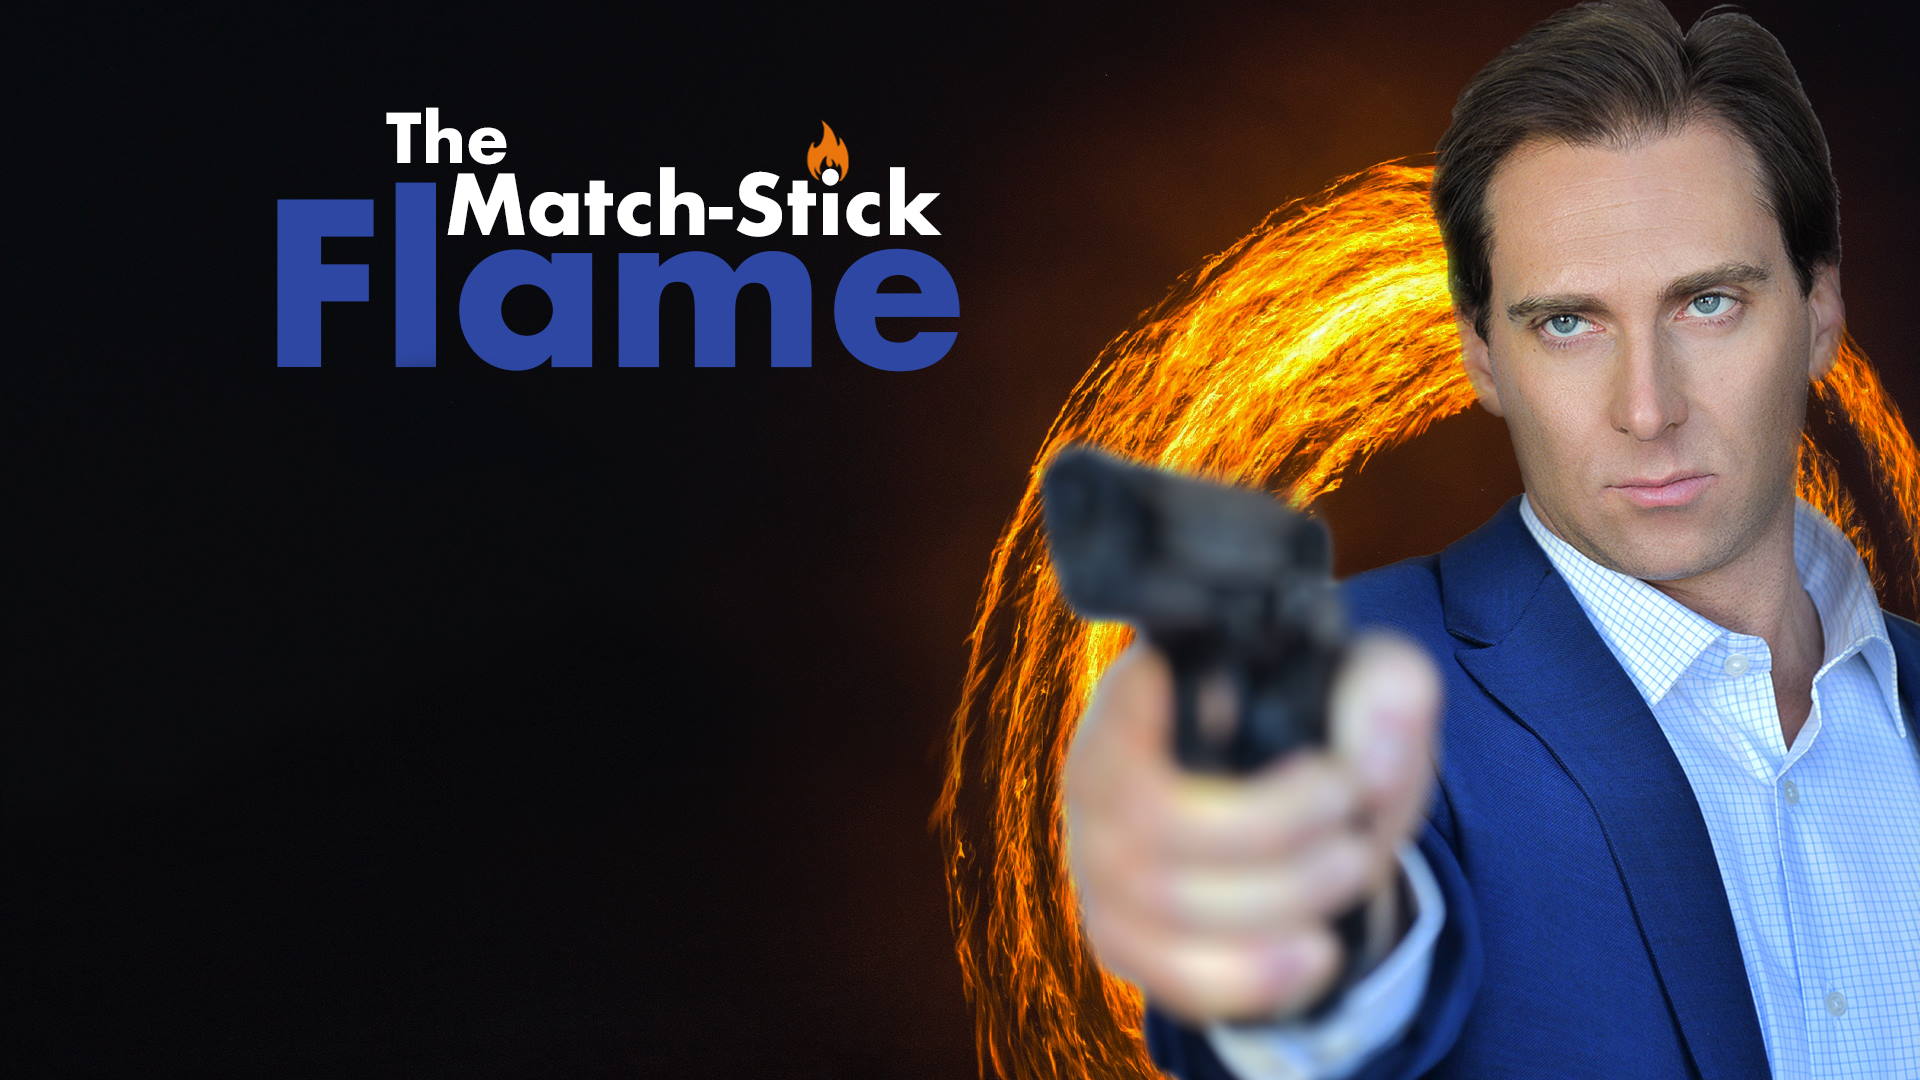 The Match Stick Flame